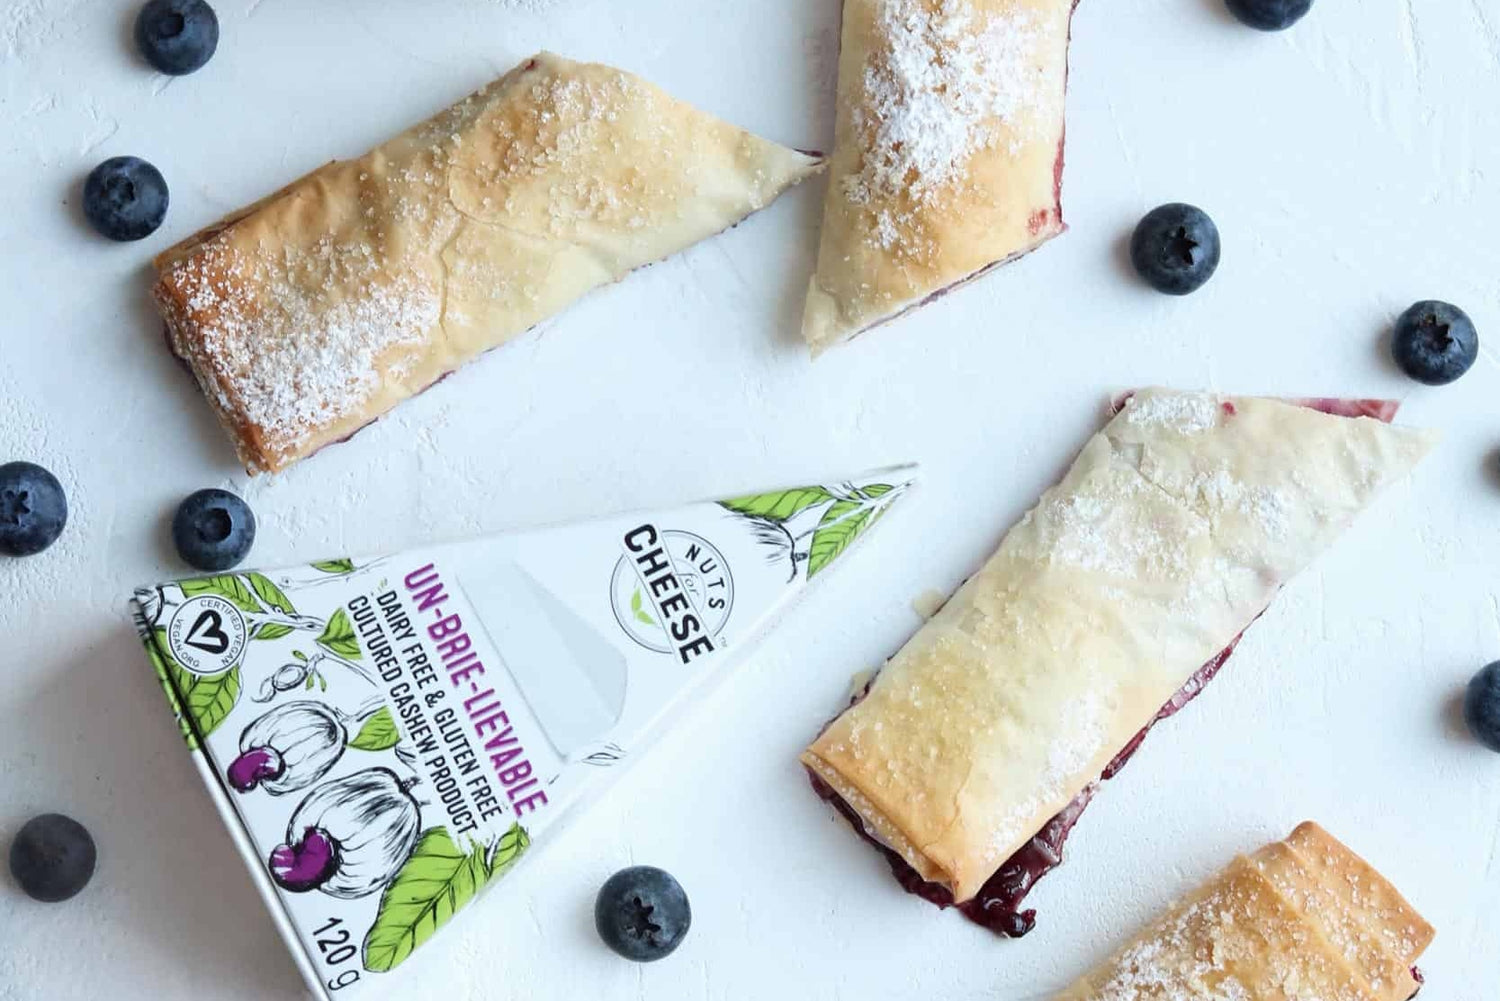 Baked phyllo rolls stuffed with dairy-free brie cheese and a balsamic blueberry compote. Fresh blueberries are sprinkled around and a box of dairy-free brie cheese is next to the rolls.